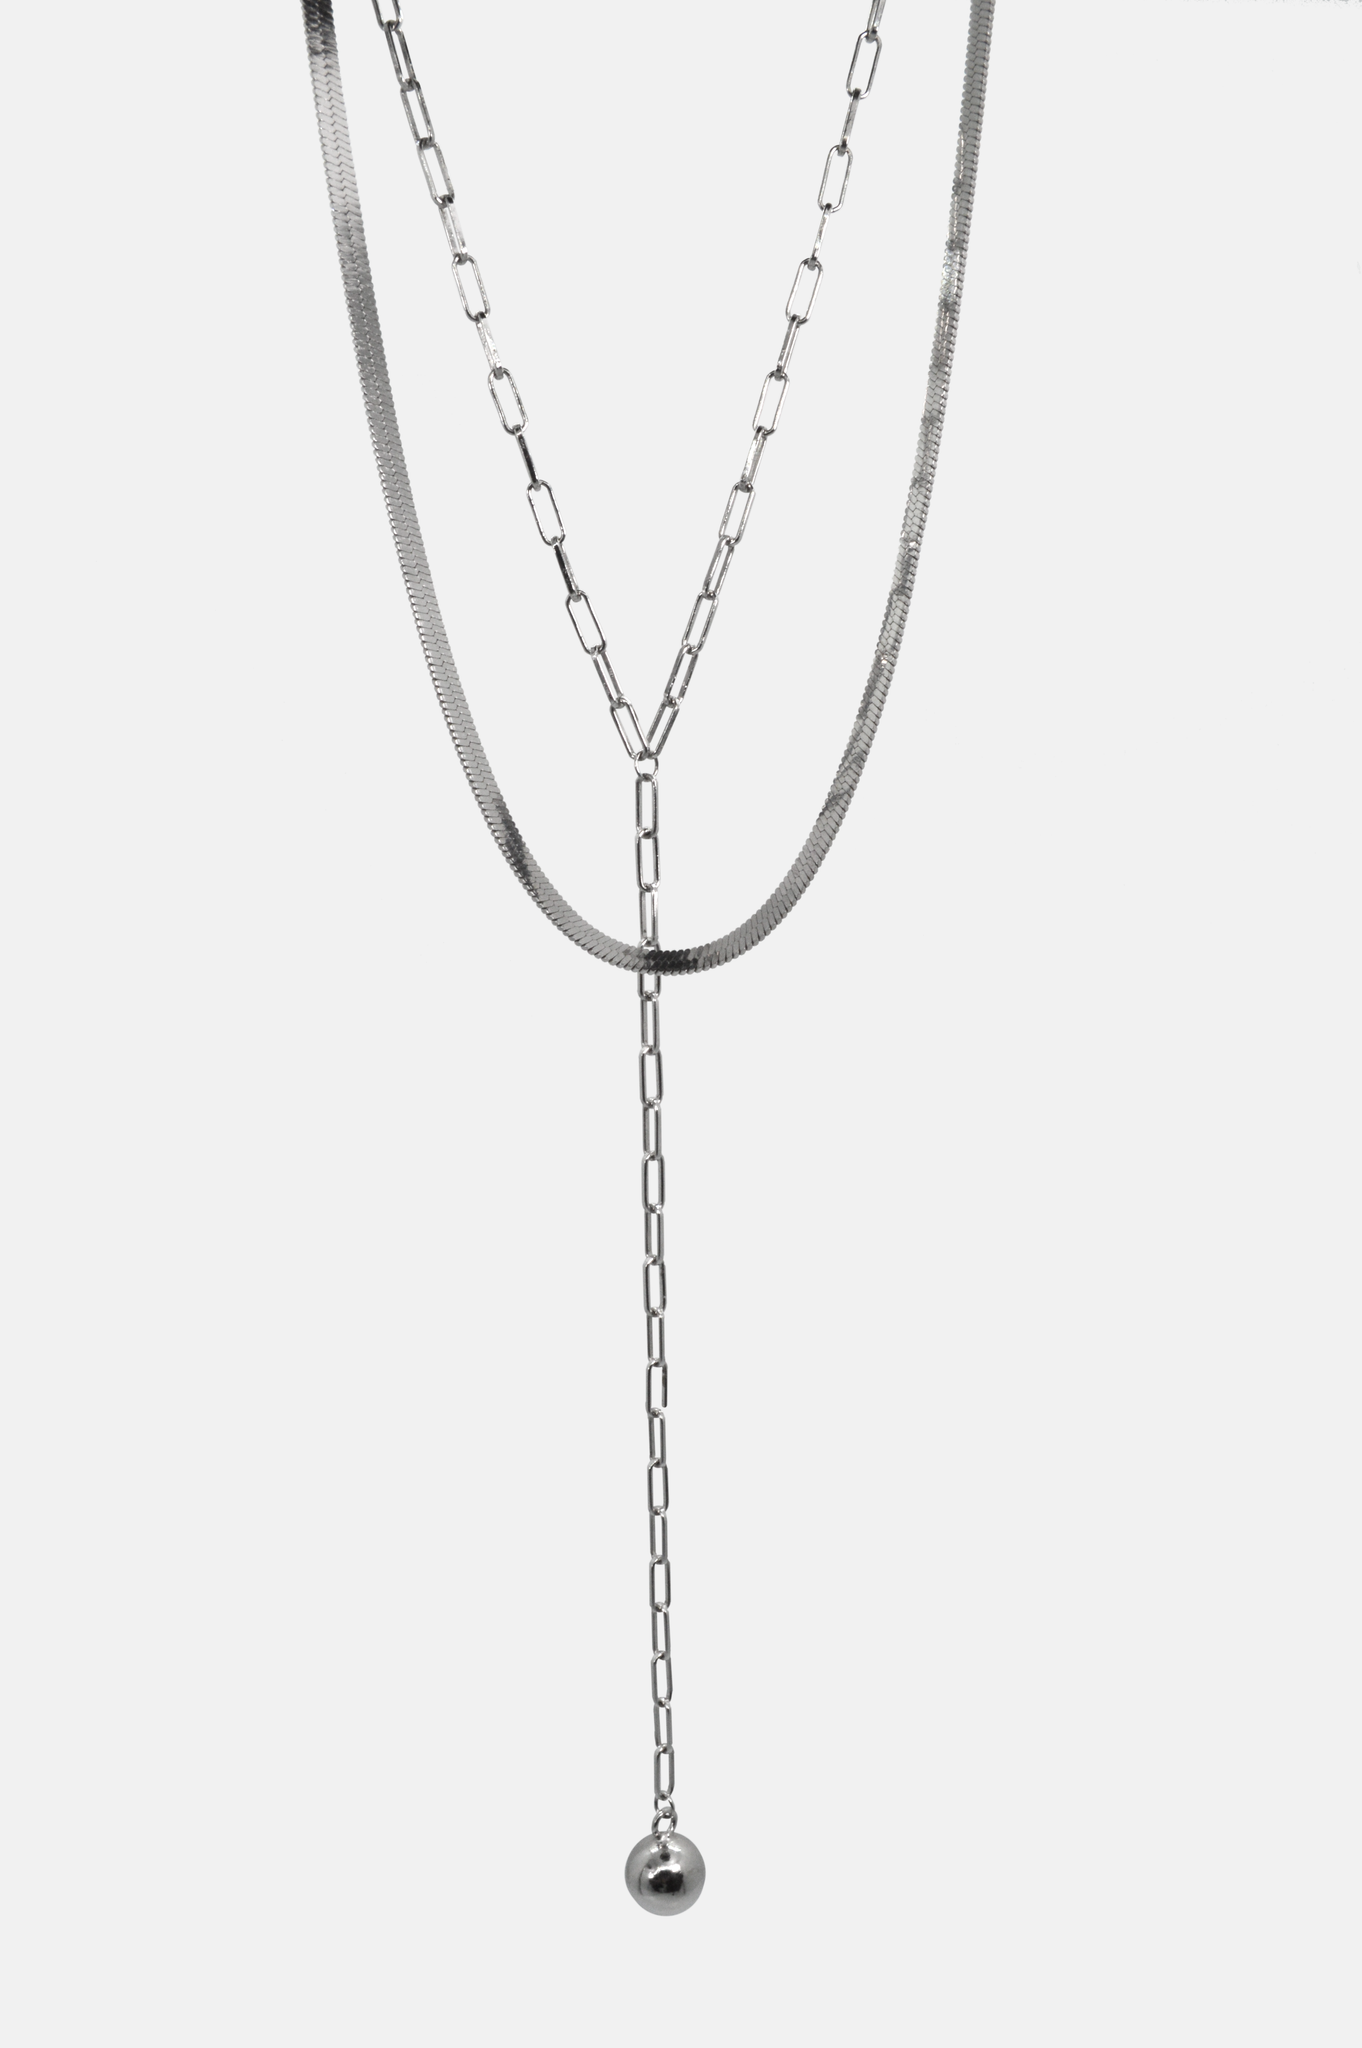 Rivulet -  Stacked Sterling Silver Necklace